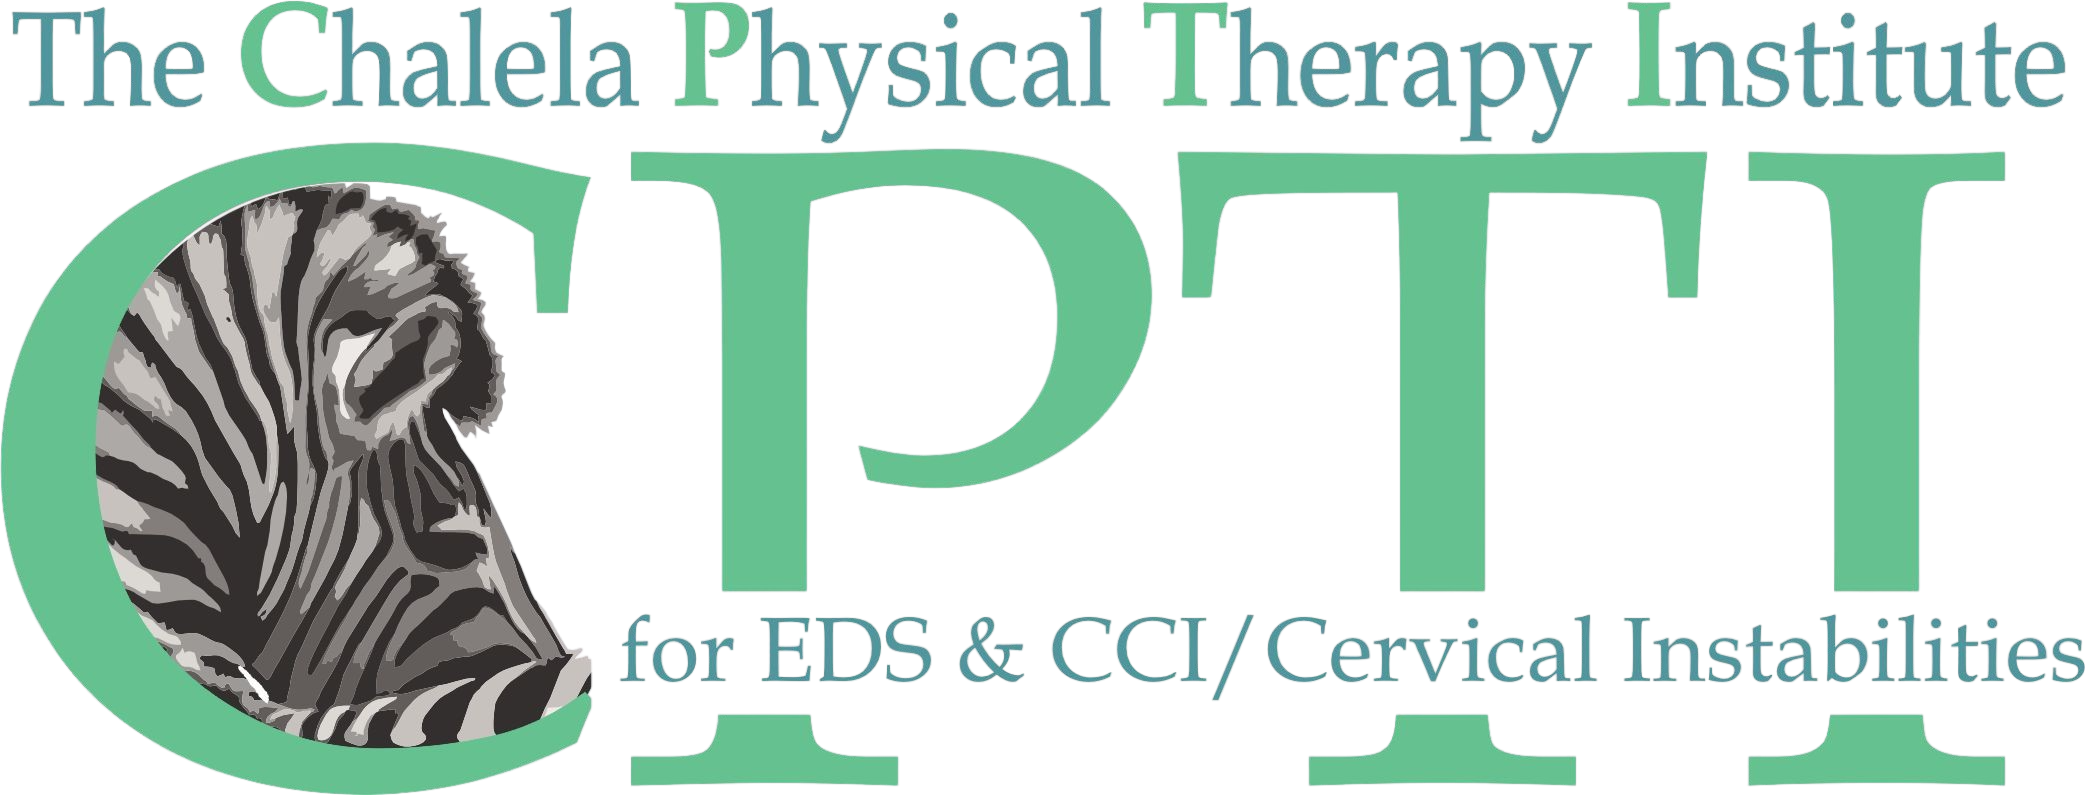 Chalela Physical Therapy Institute for EDS and CCI/Cervical Instability